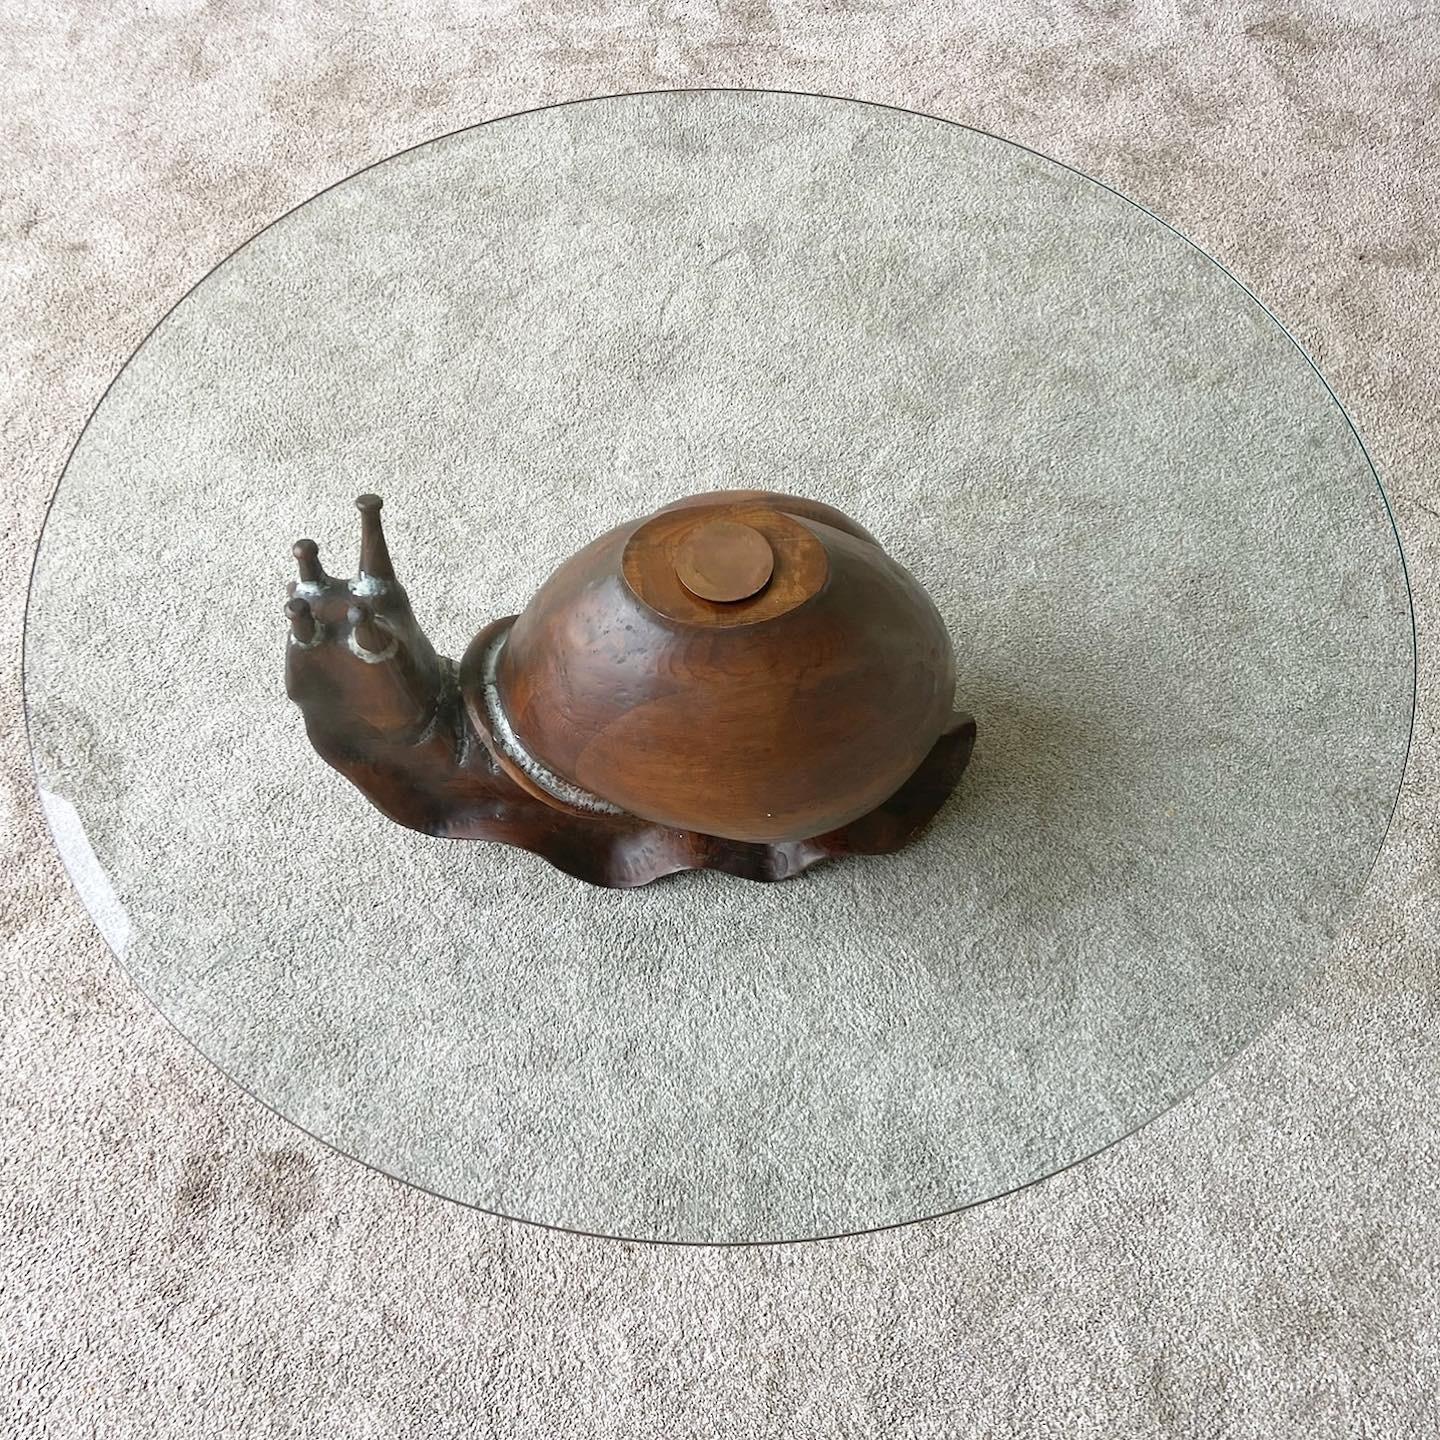 American “Snail” Glass Top Coffee Table by Federico Armijo